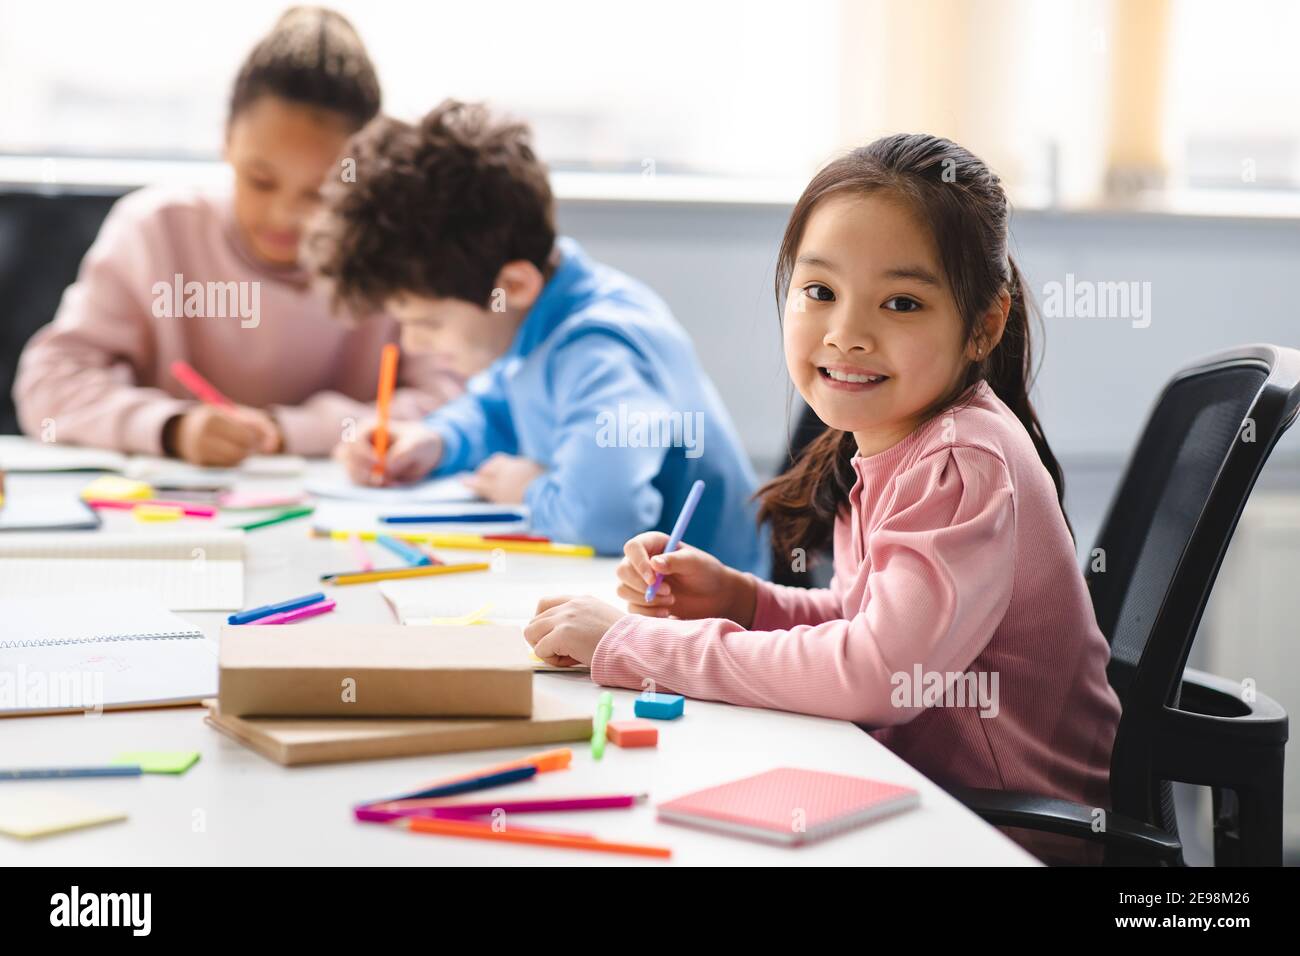 Smiling asian school girl sitting at desk in classroom Stock Photo